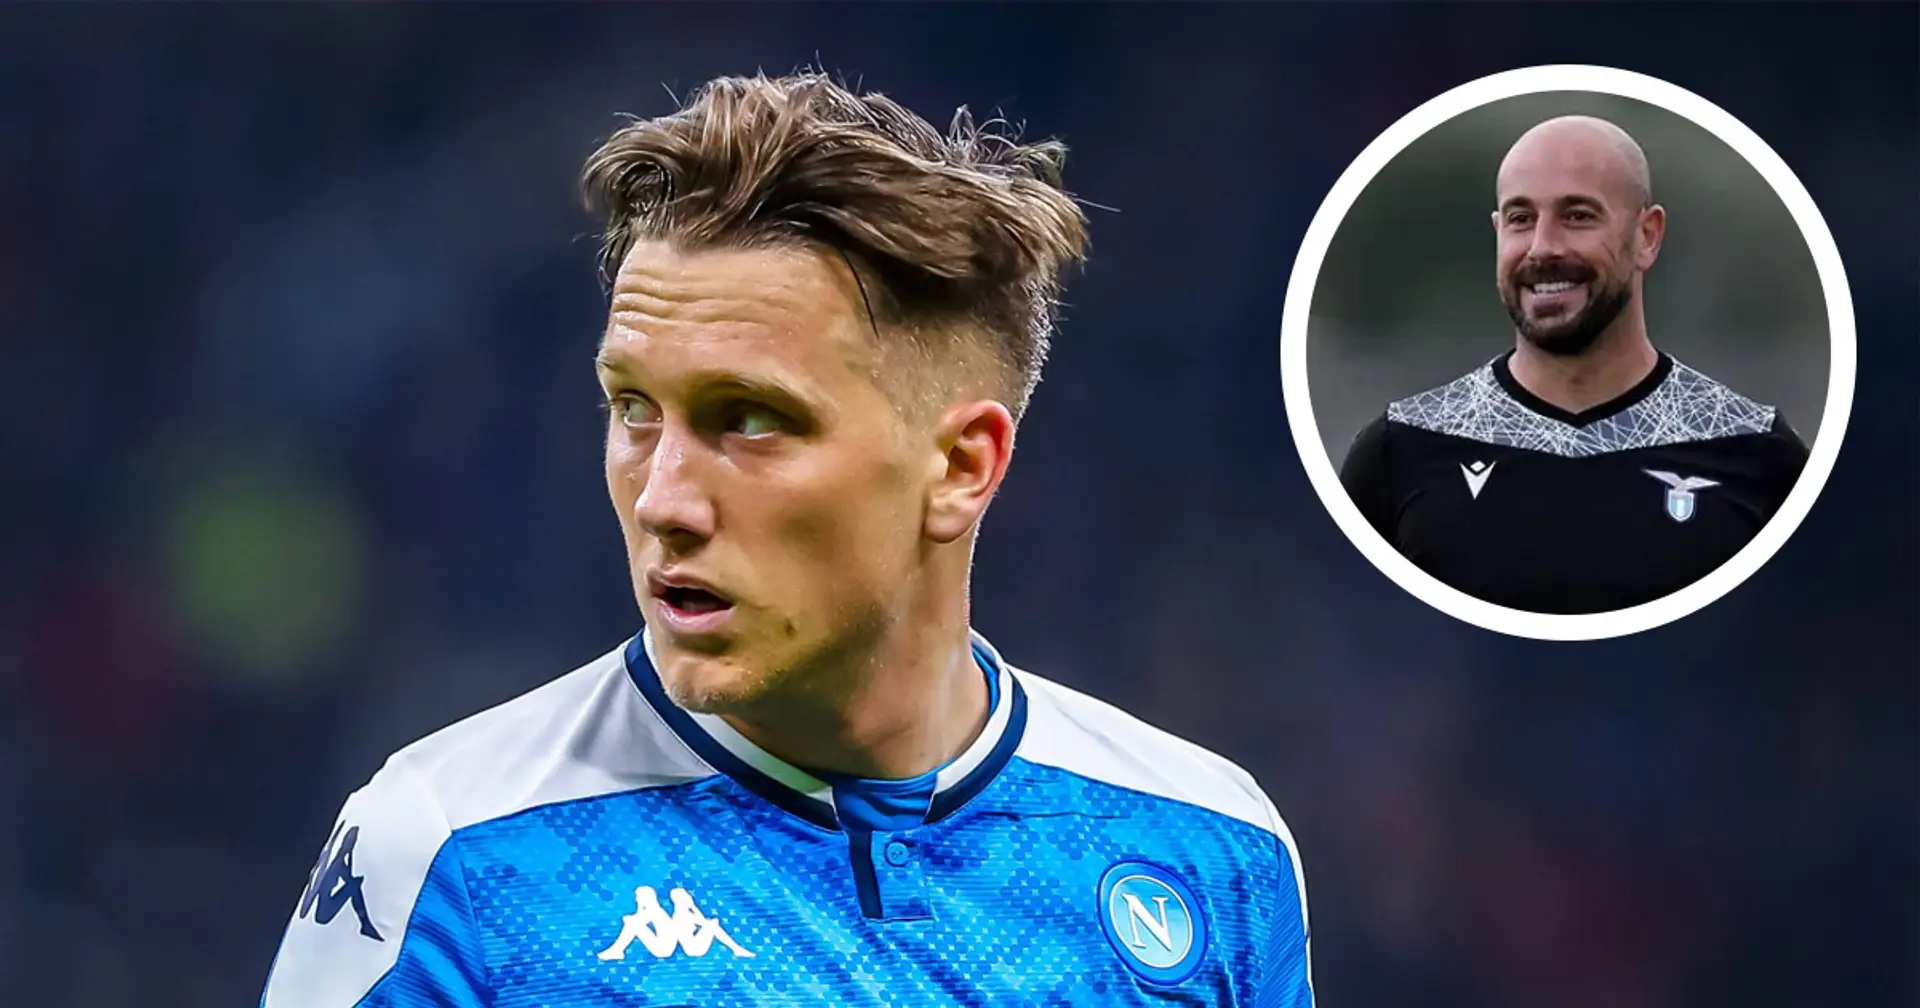 'He's a Real Madrid or Barcelona player': Pepe Reina tips 'out of the ordinary' Piotr Zielinski to end up at La Liga giant